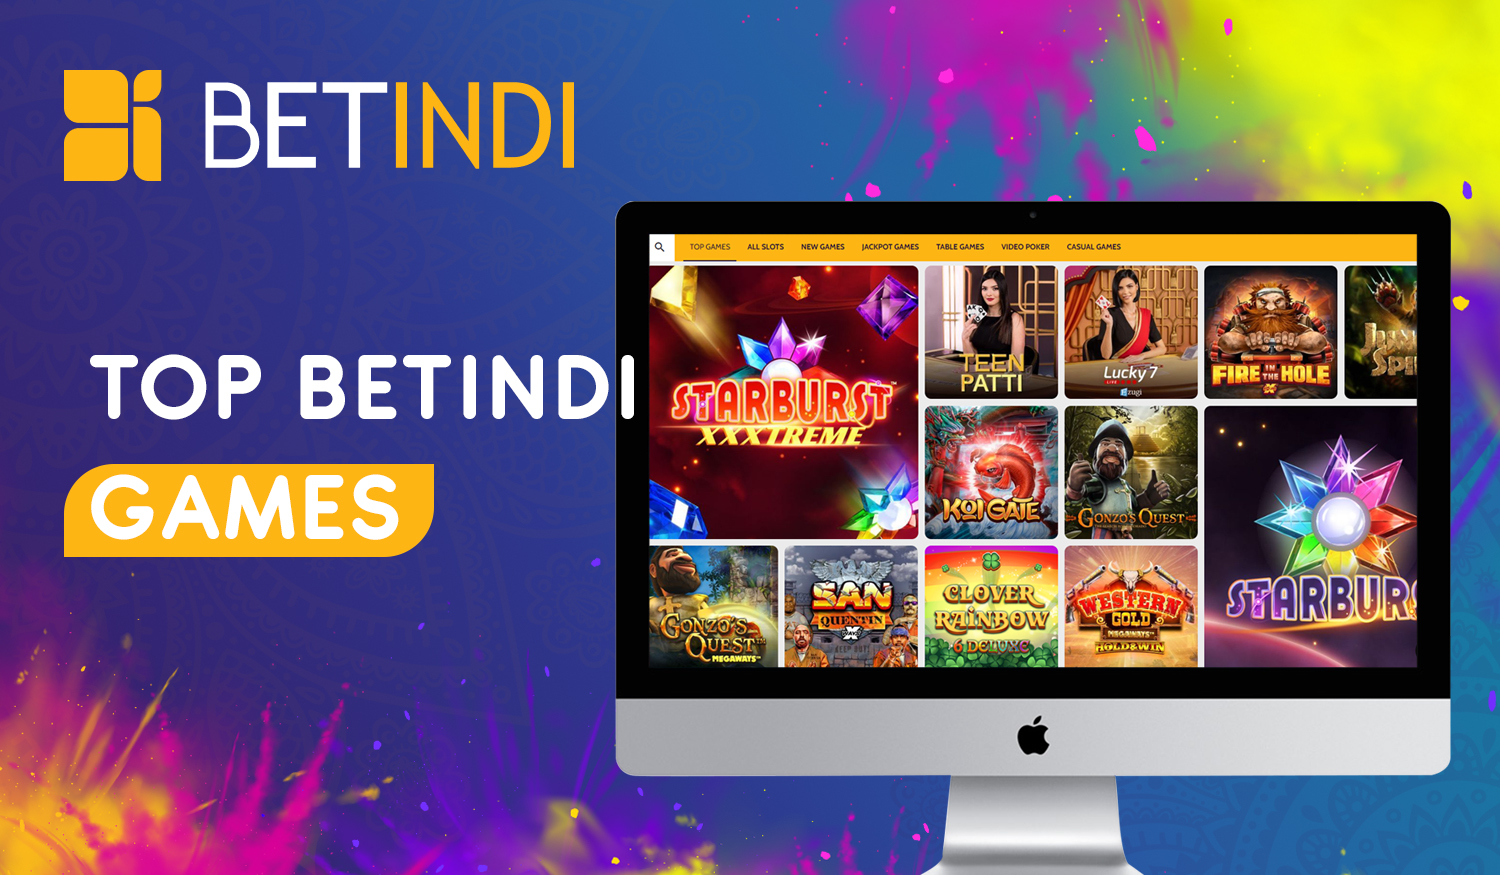 The most popular games among Indian users in the Betindi section casino